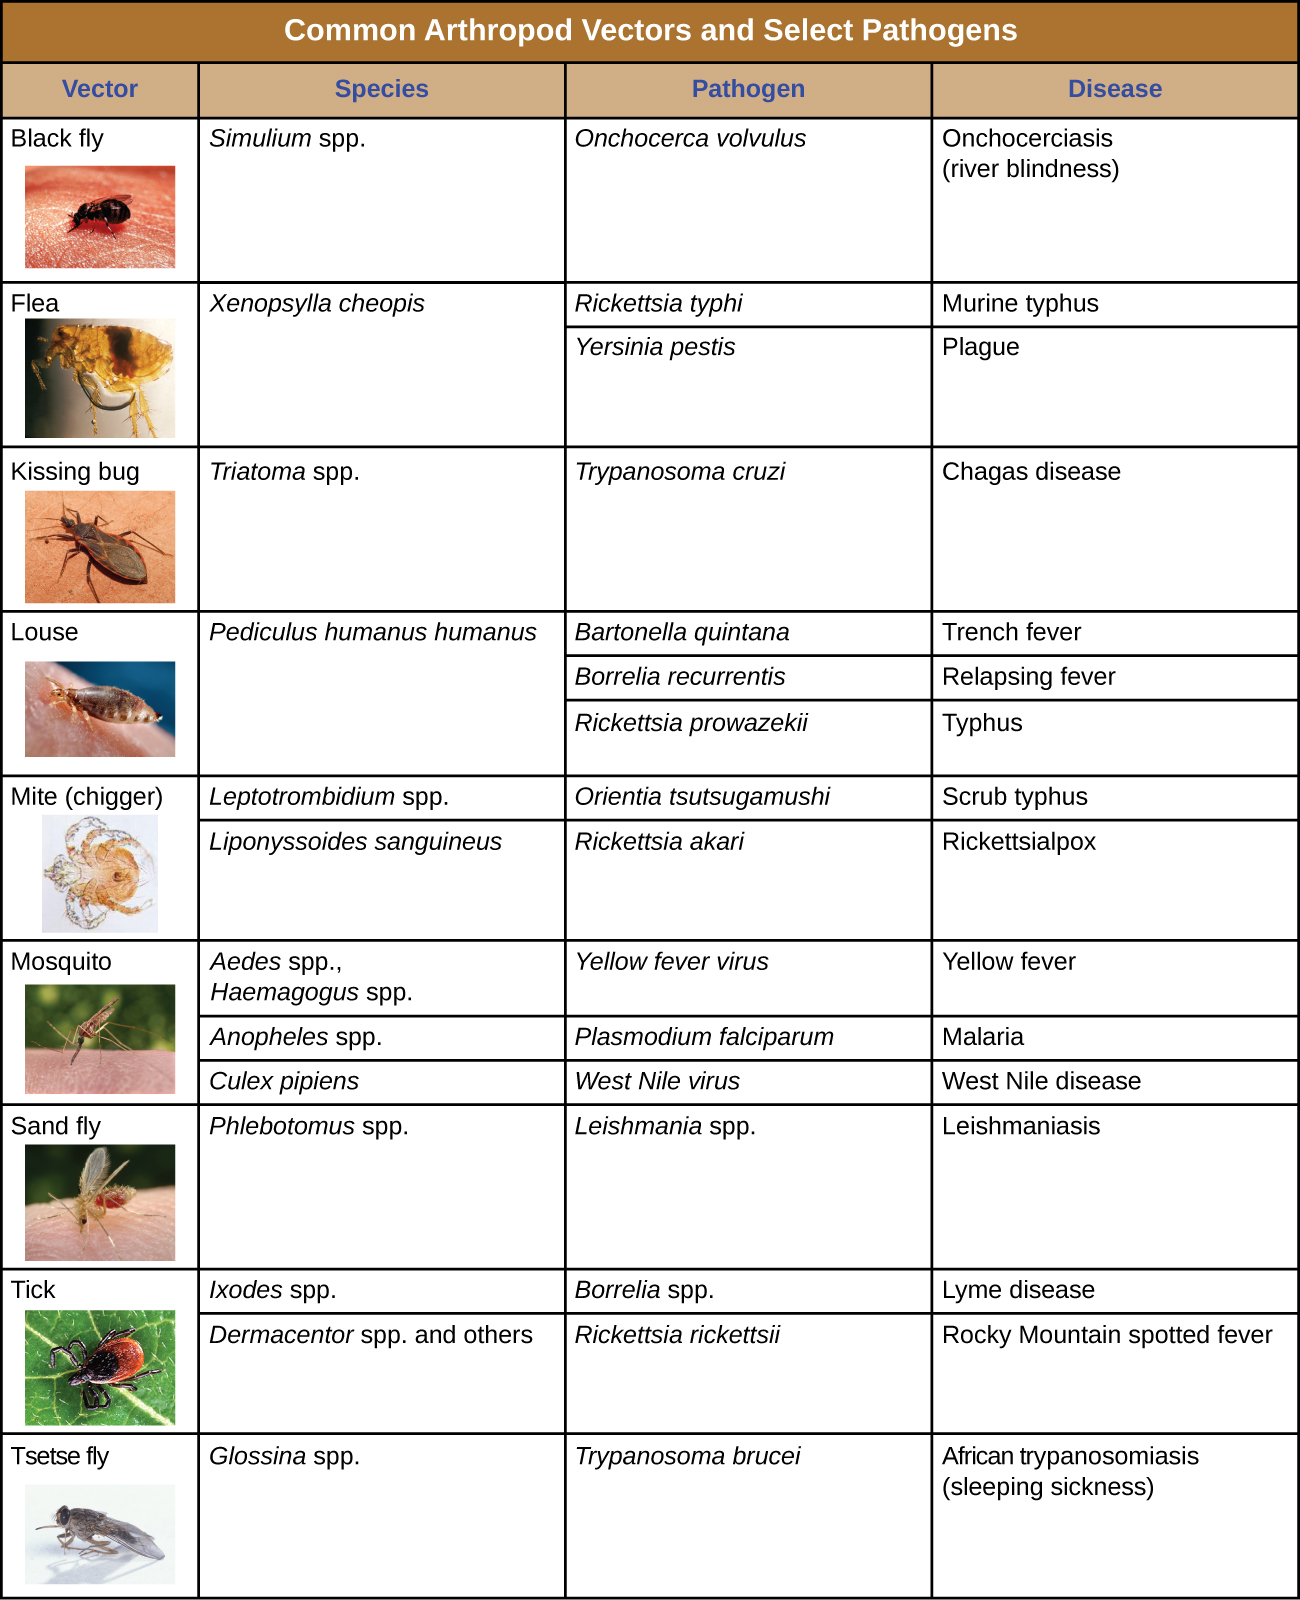 arthropod vectors including the pathogens they spread and the diseases these pathogens cause